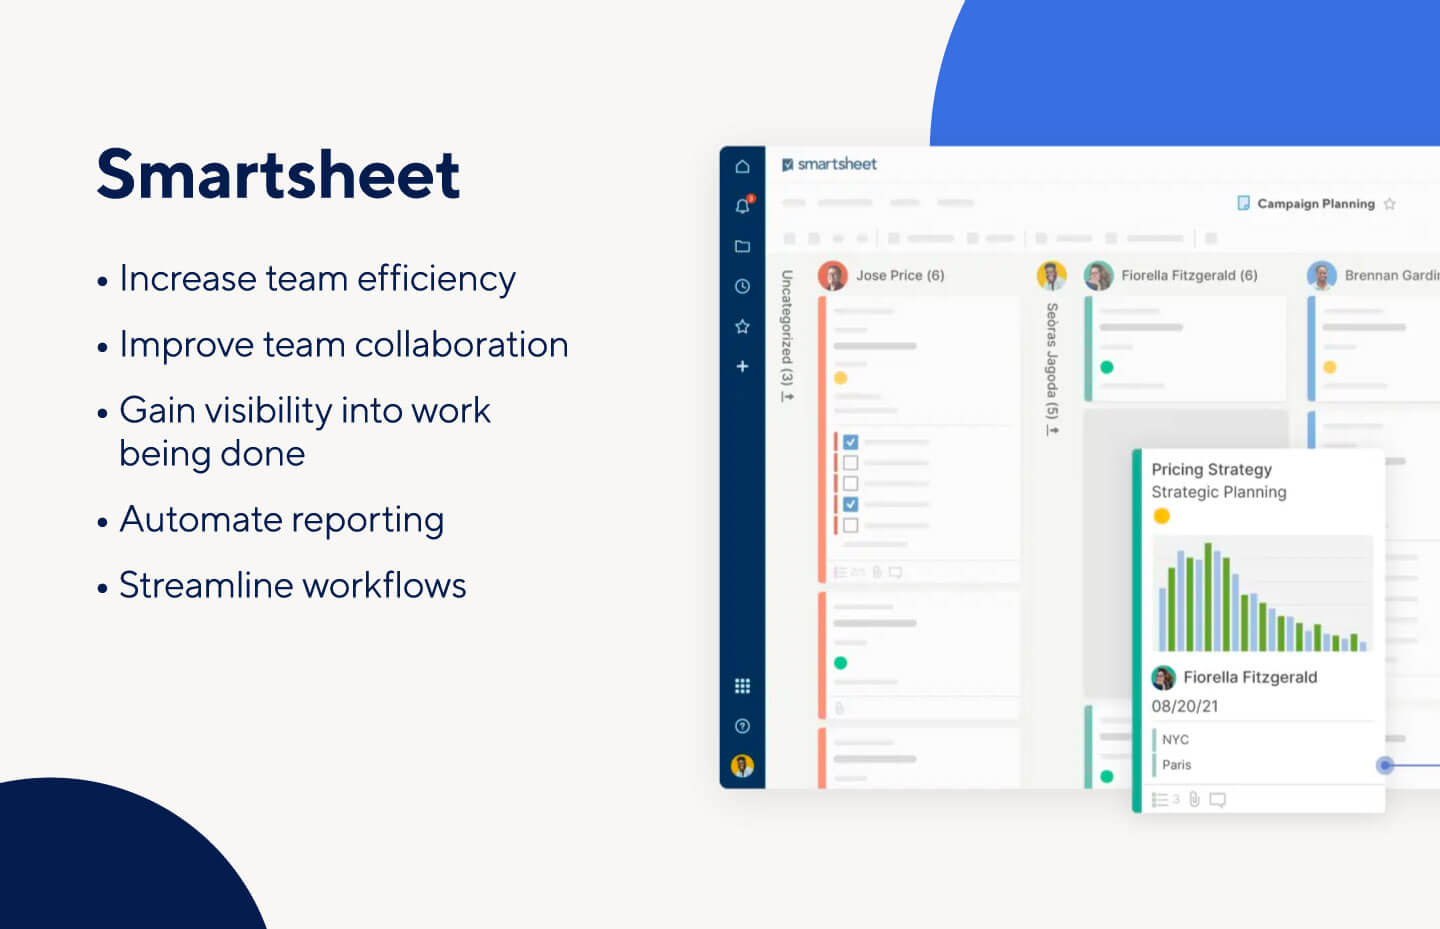 Overview of Smartsheet and the benefits it offers as a digital marketing tool, including collaboration and visibility.